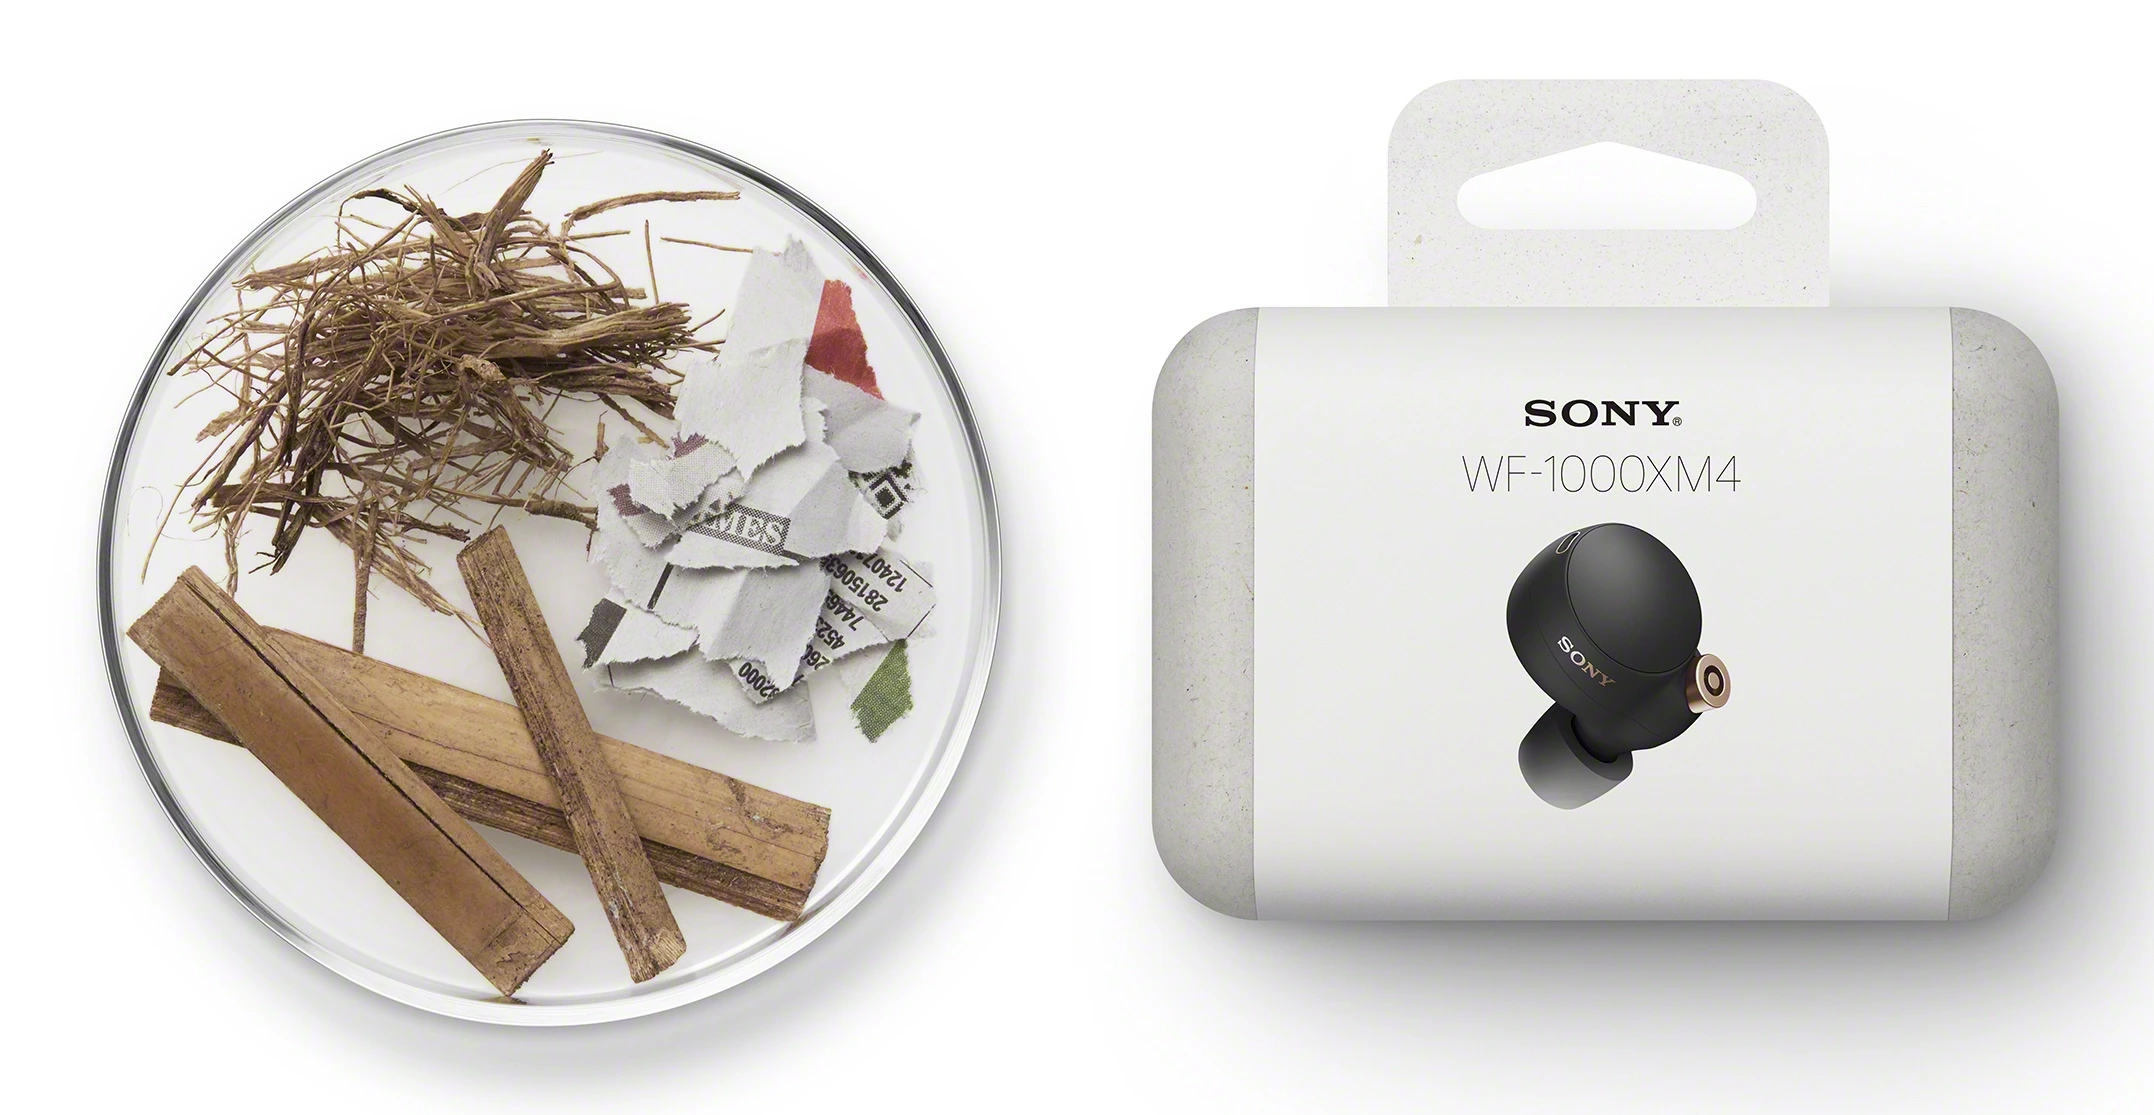 Sony's packaging is made from sugarcane waste